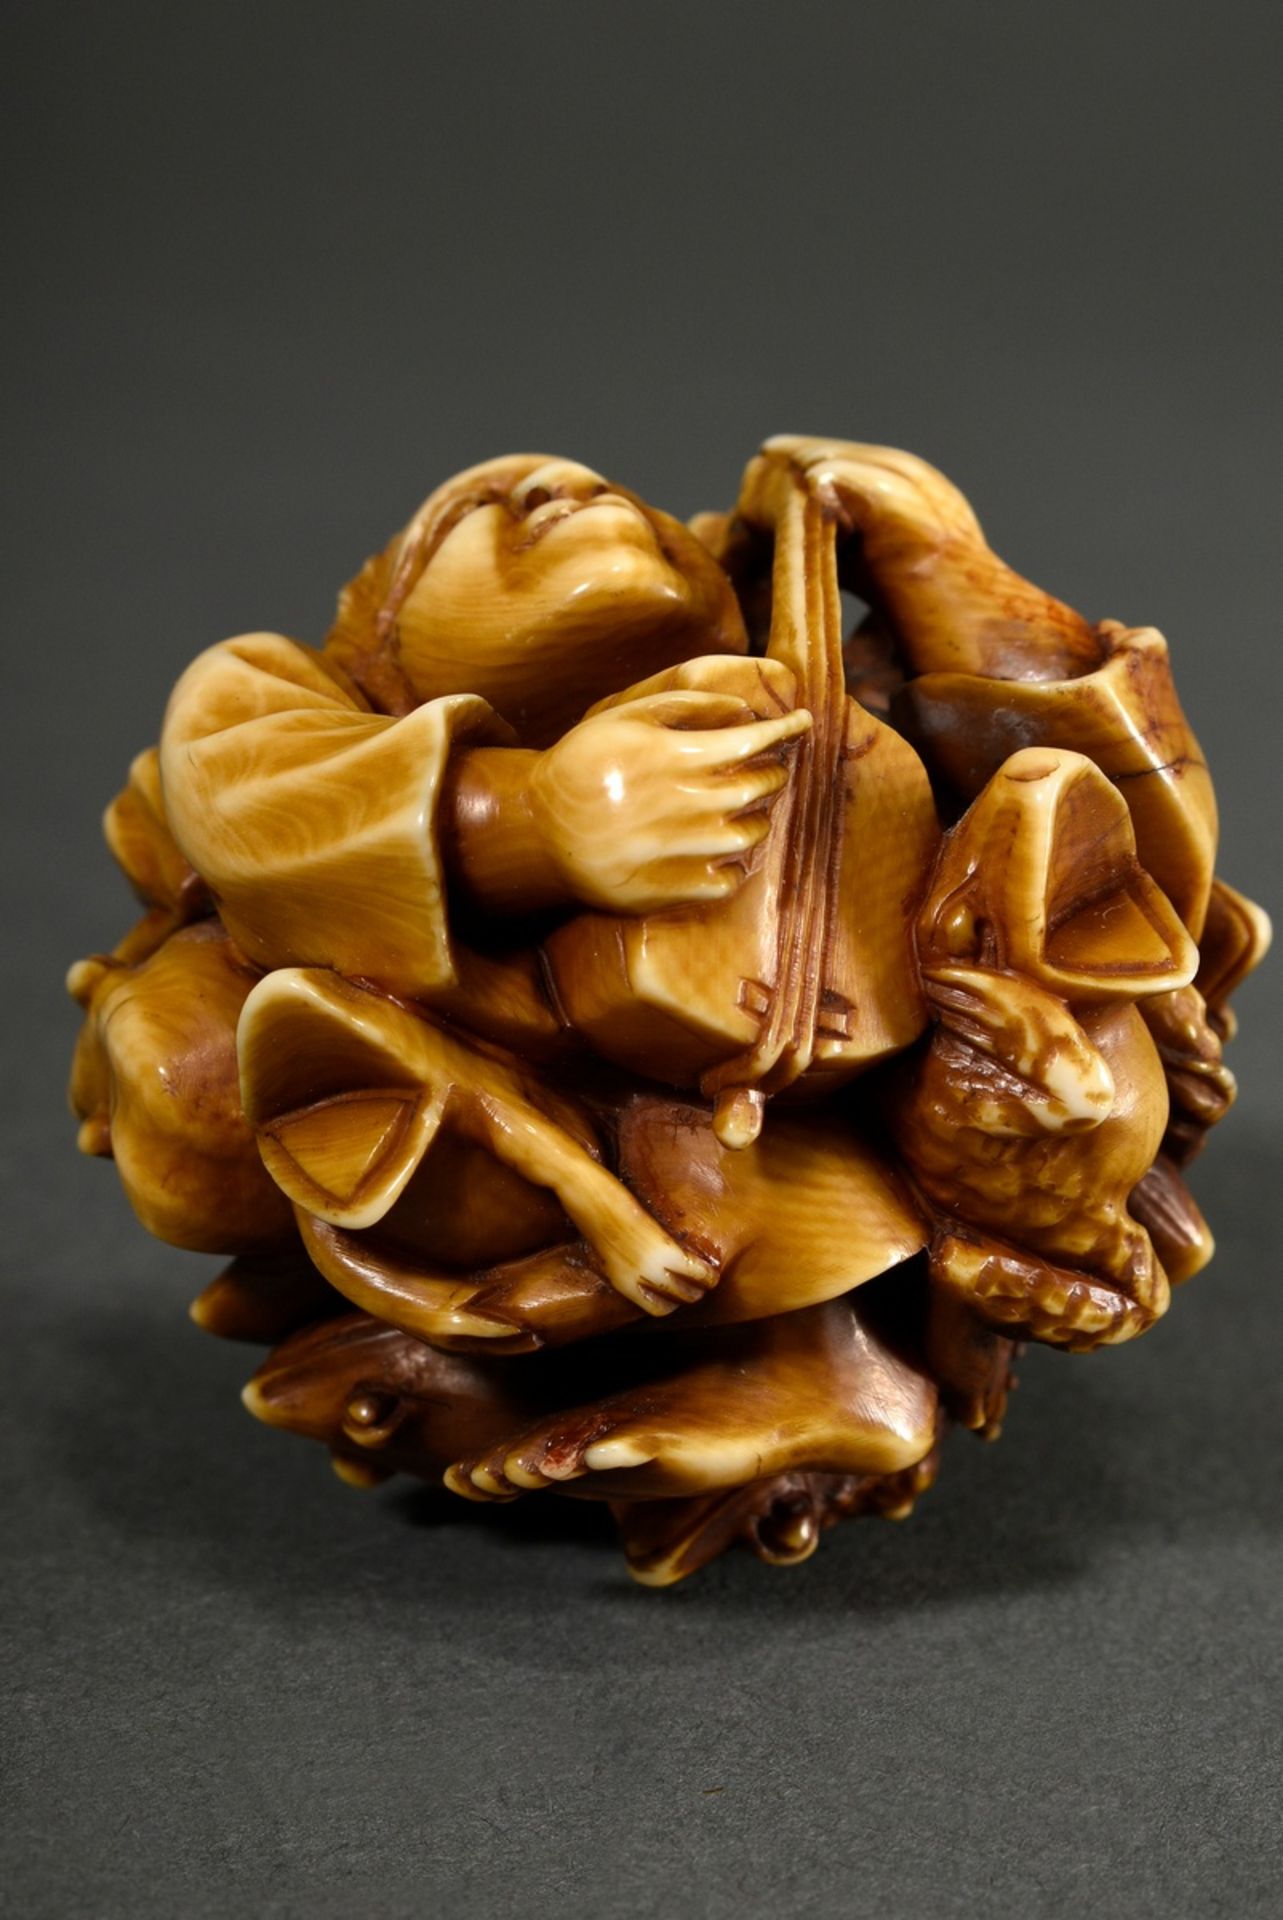 Ivory okimono in ball shape ‘Shamisen player with toads’, patinated, Japan Meiji period, around 190 - Image 5 of 7